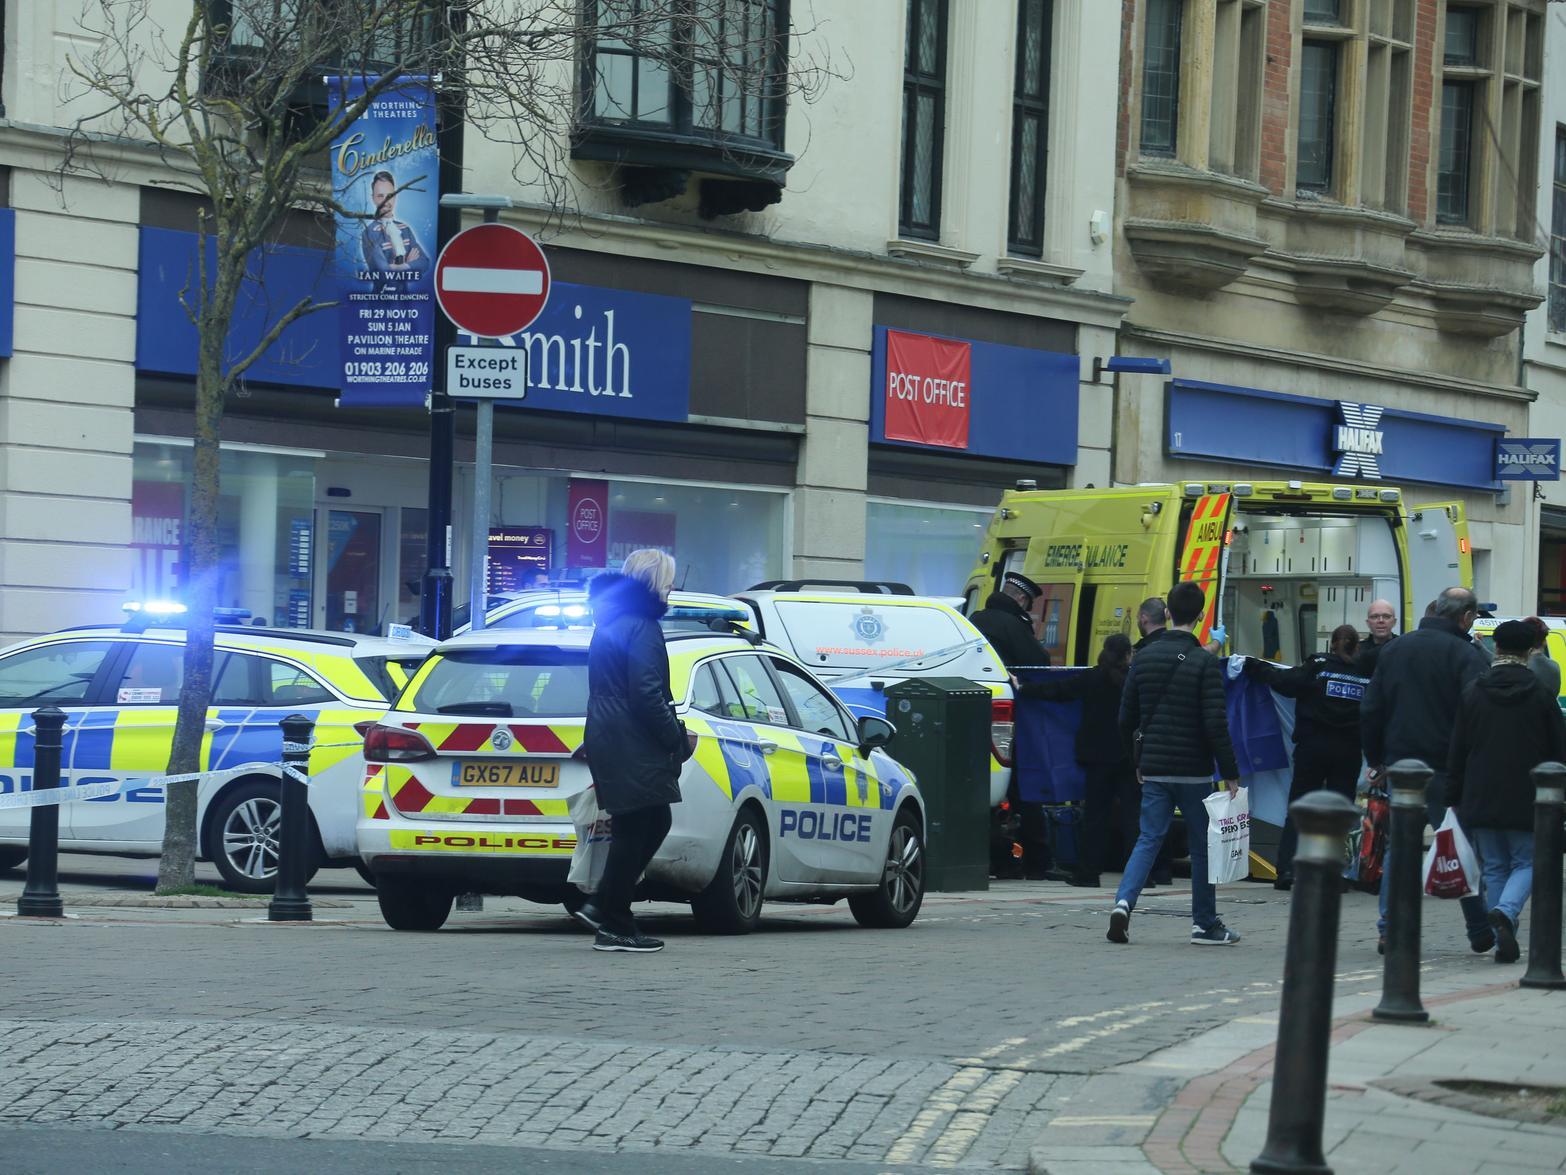 The scene of the incident in South Street, Worthing